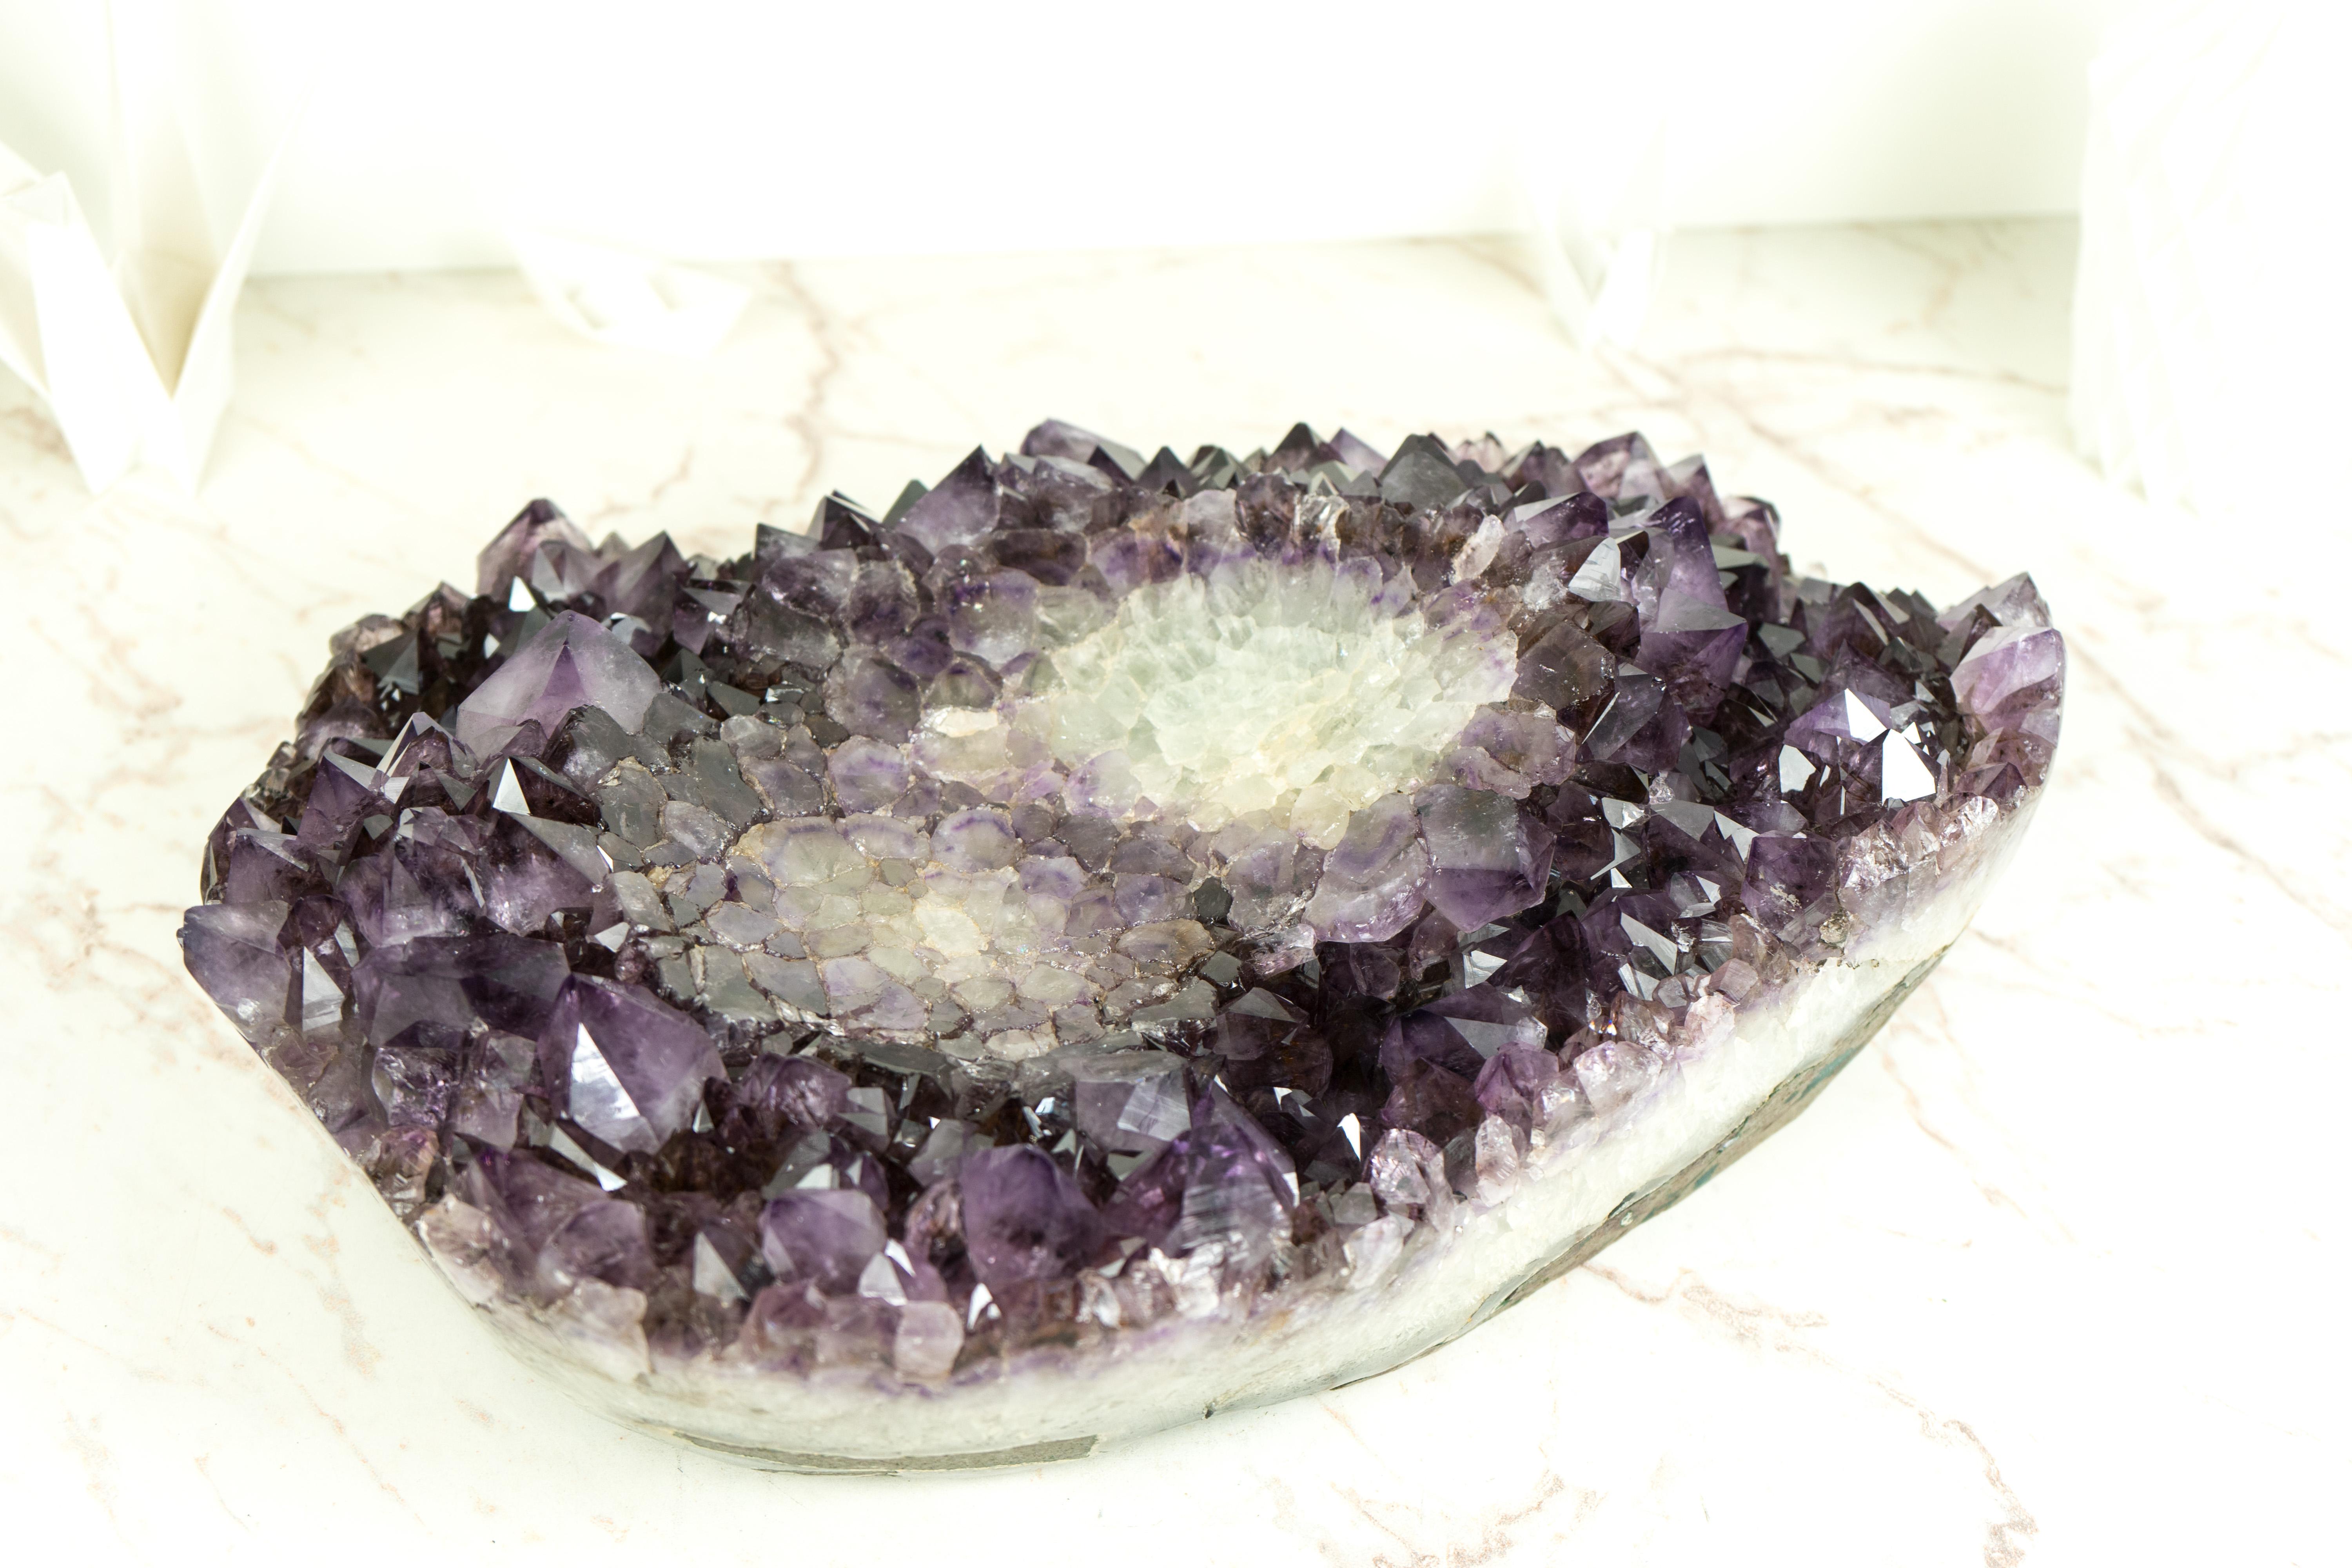 Contemporary Natural Amethyst Decorative Crystal Bowl, Hand Carved Deep Purple Amethyst Plate